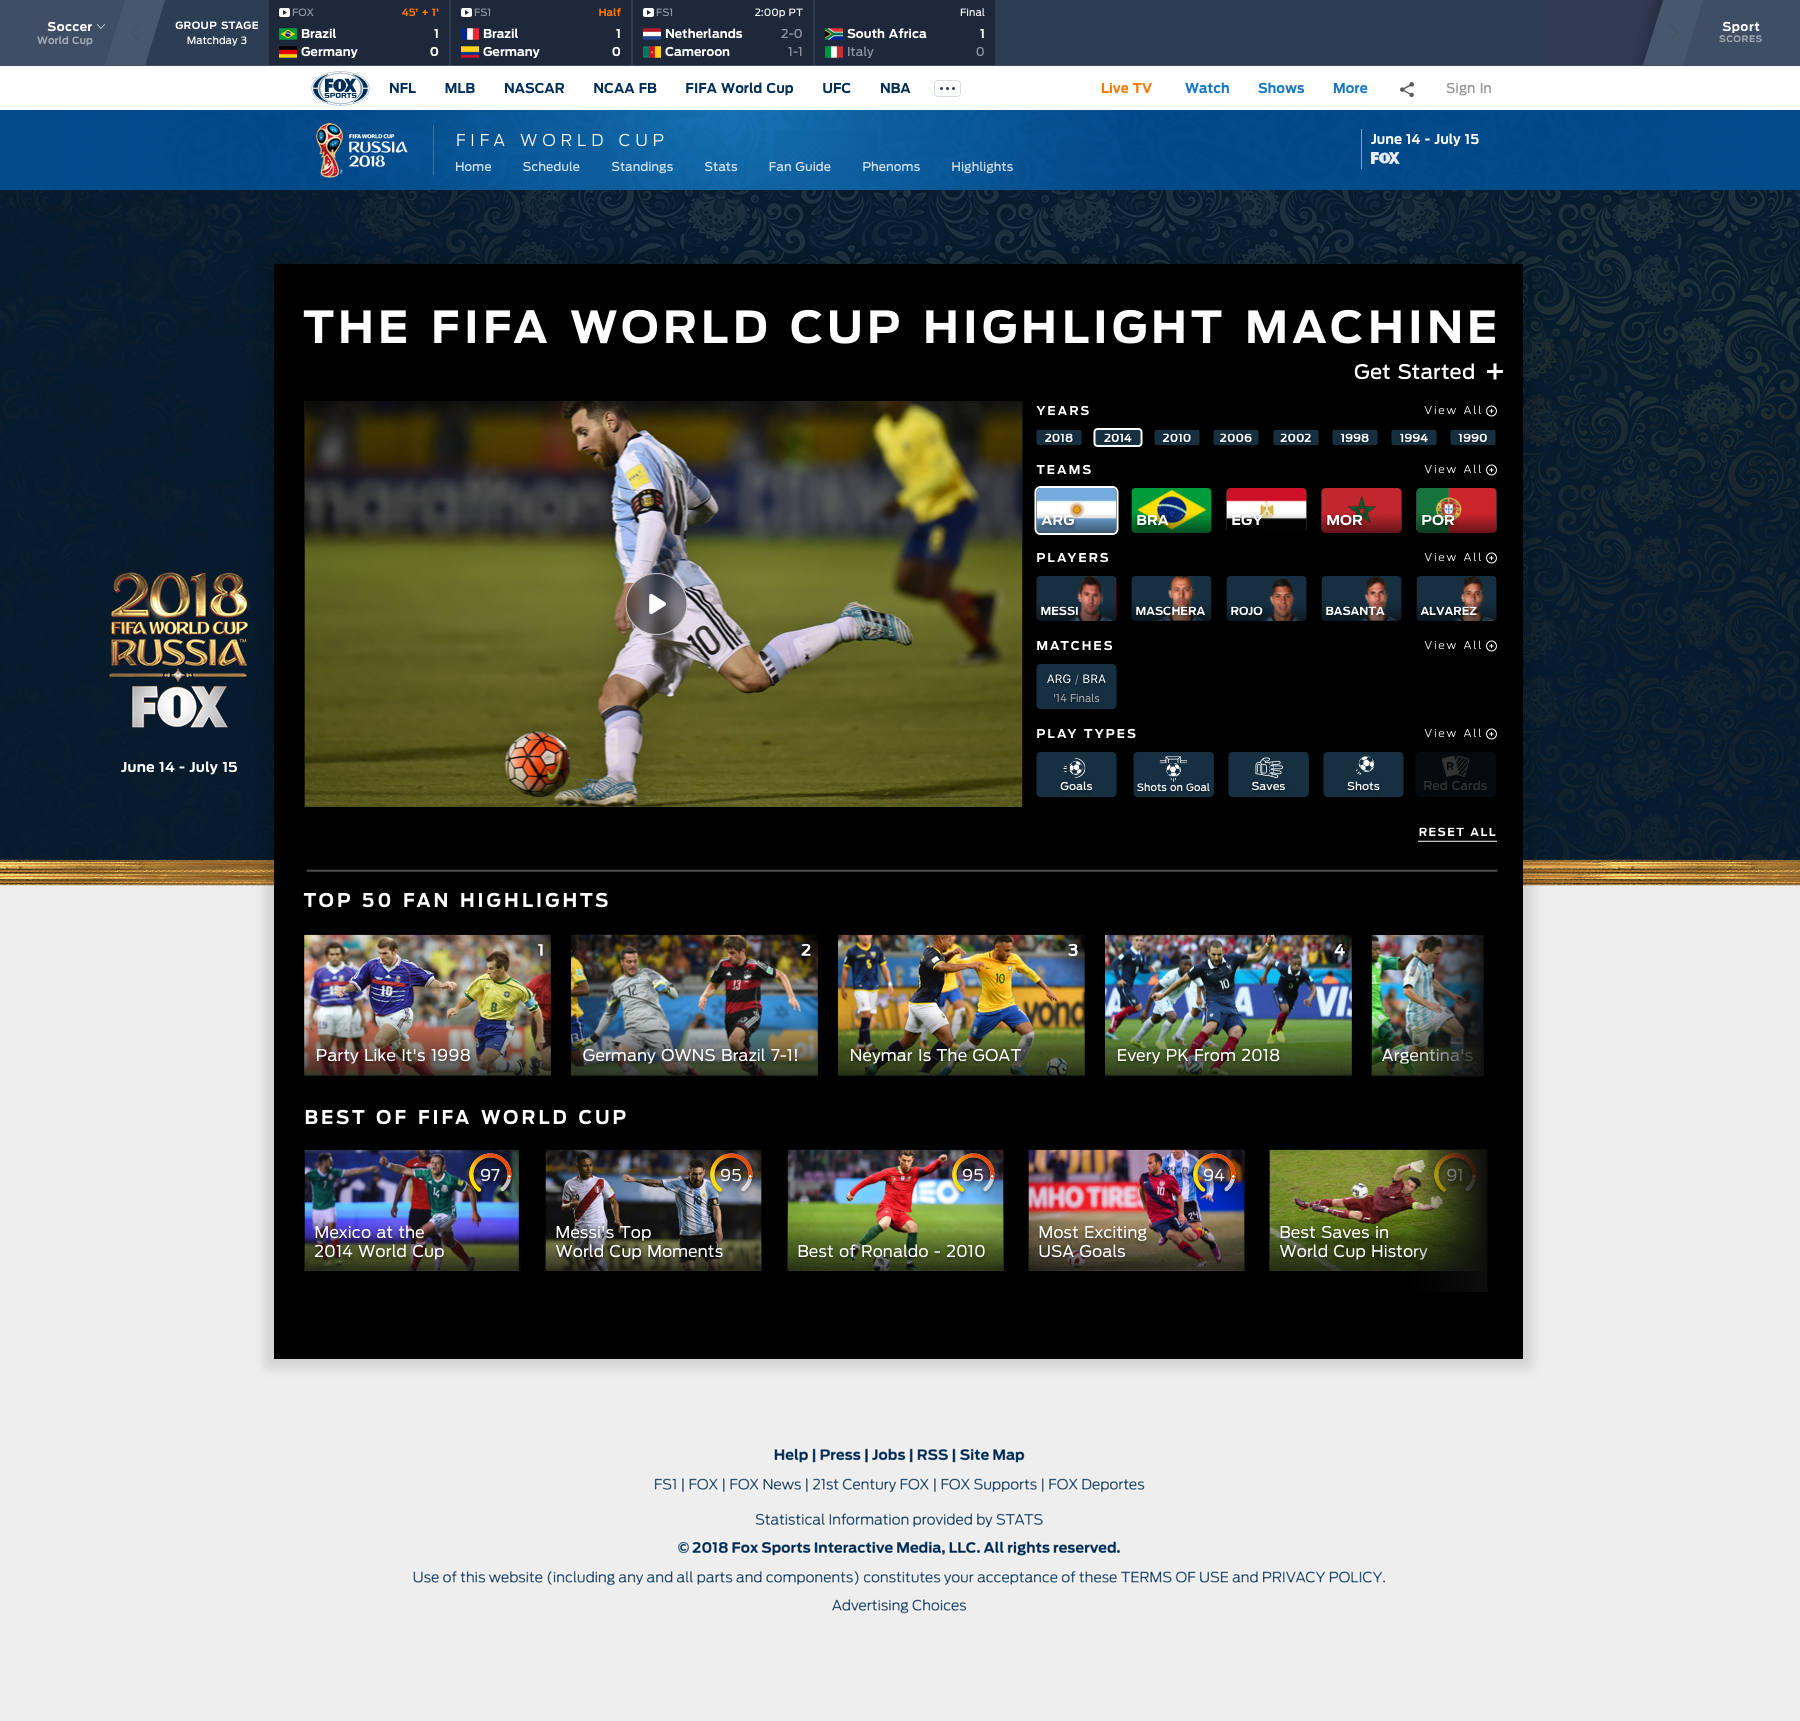 Fox Sports Previews FIFA World Cup Digital Plans With Plenty of Video Highlights